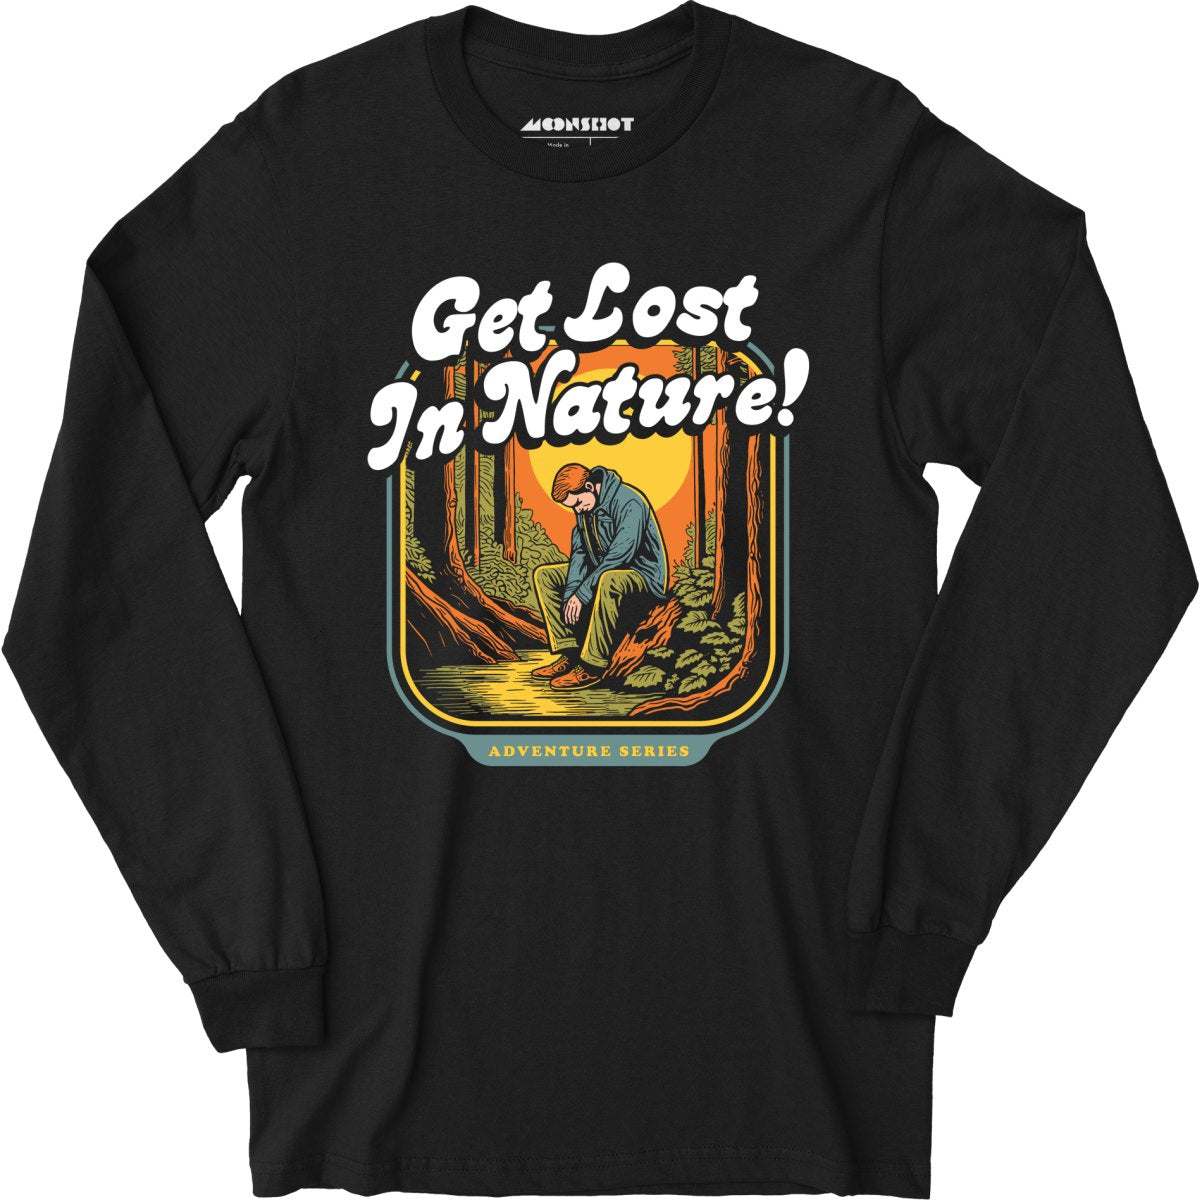 Get Lost in Nature - Long Sleeve T-Shirt